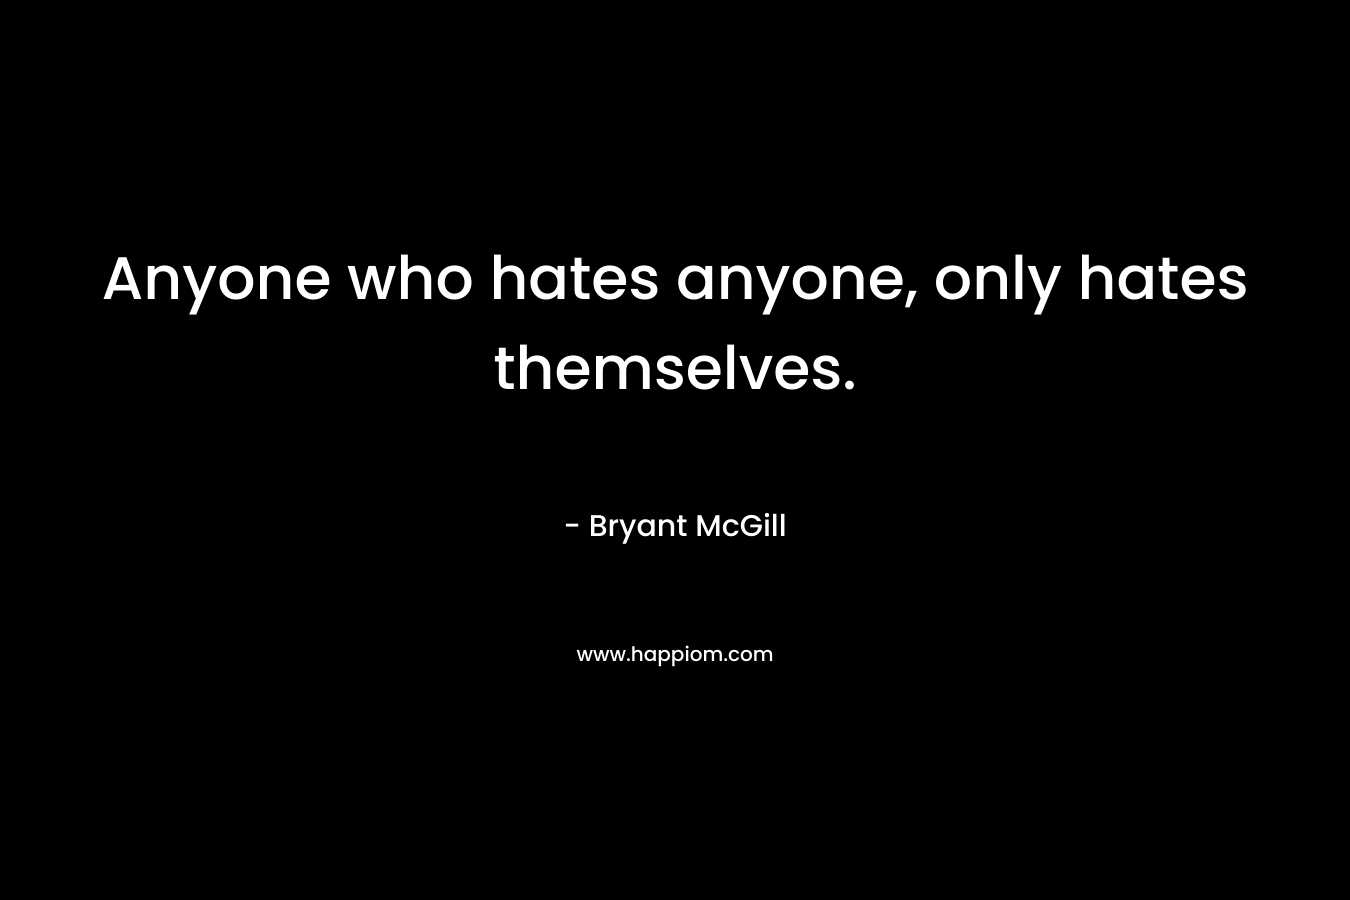 Anyone who hates anyone, only hates themselves.